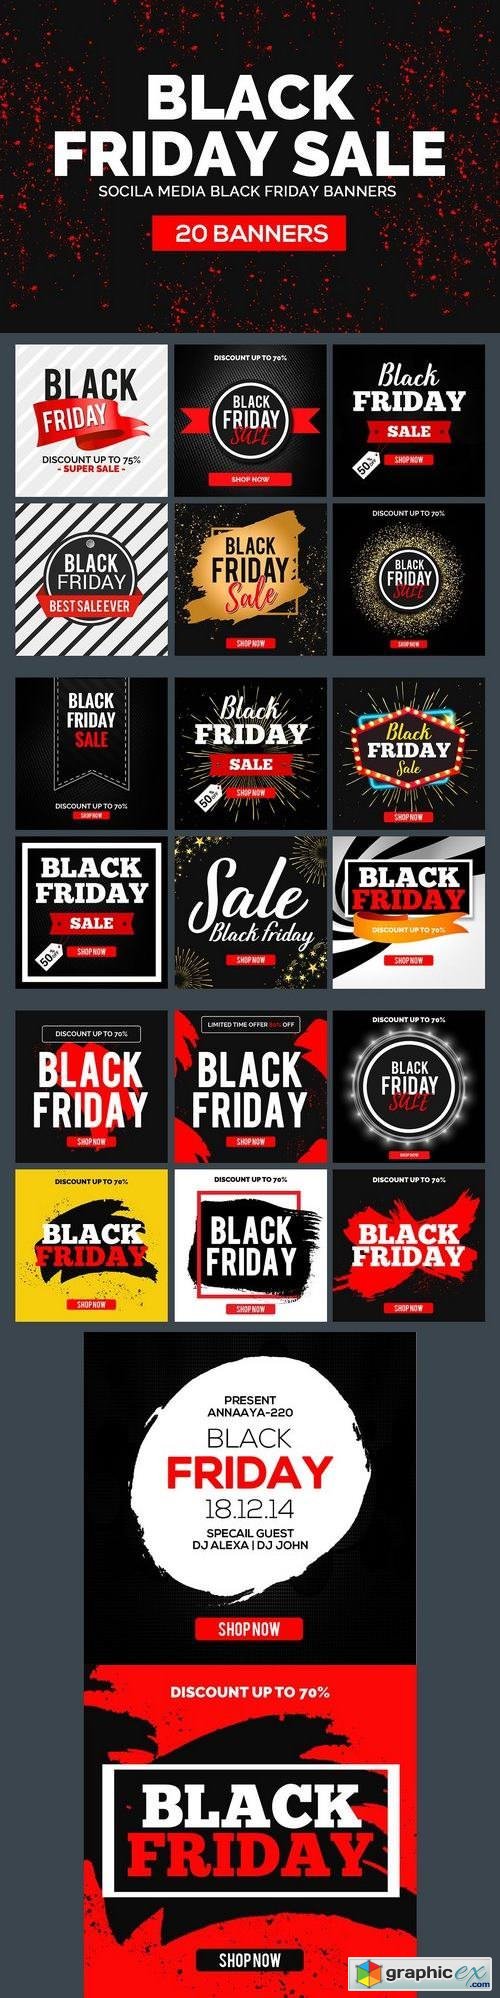 20 Black Friday Banners